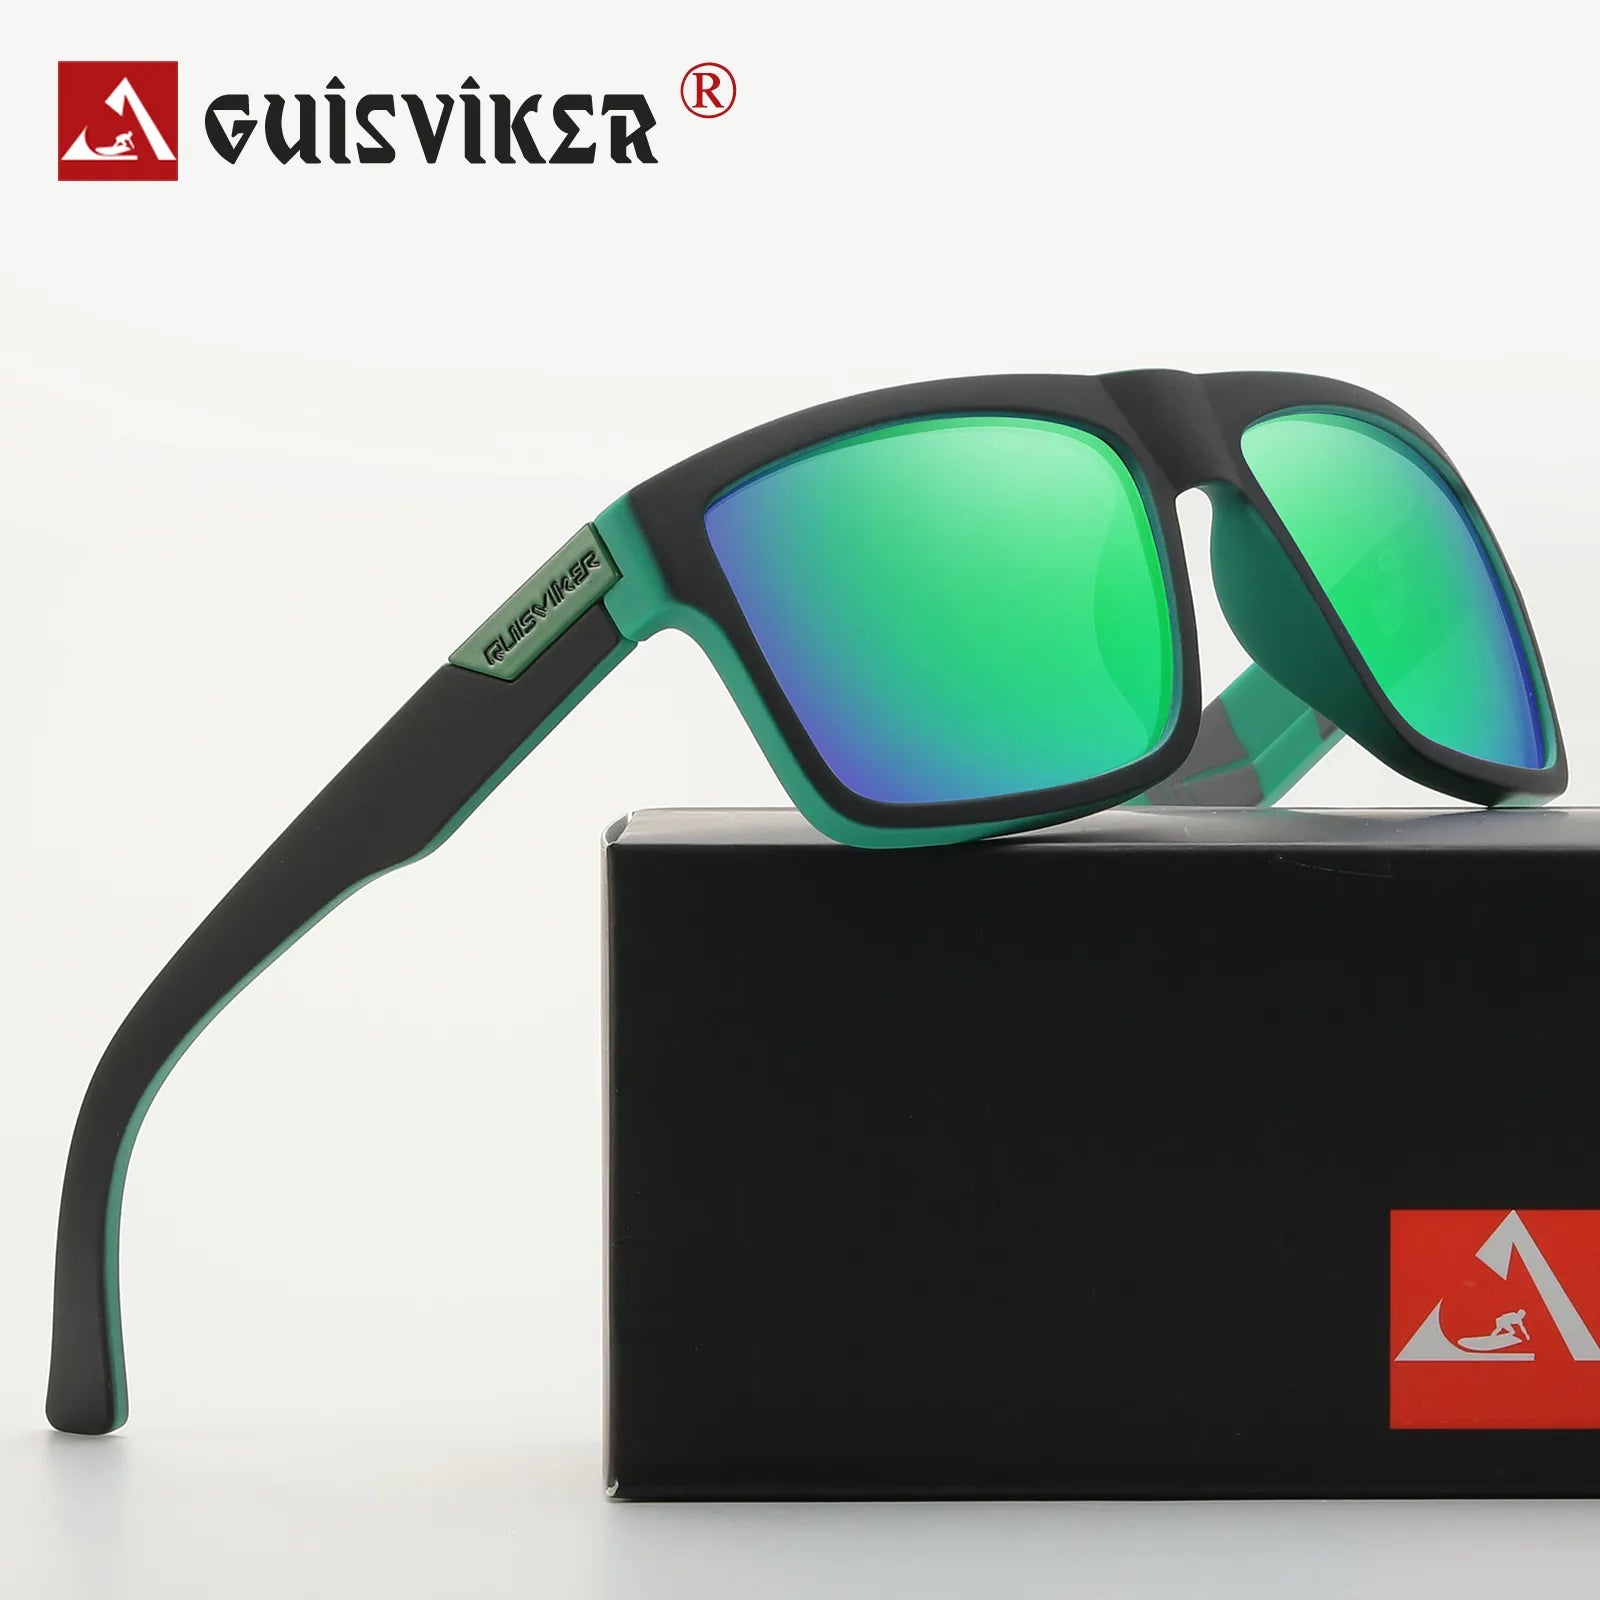 Polarized Sport Sunglasses for Outdoor Activities and Sports  petlums.com   